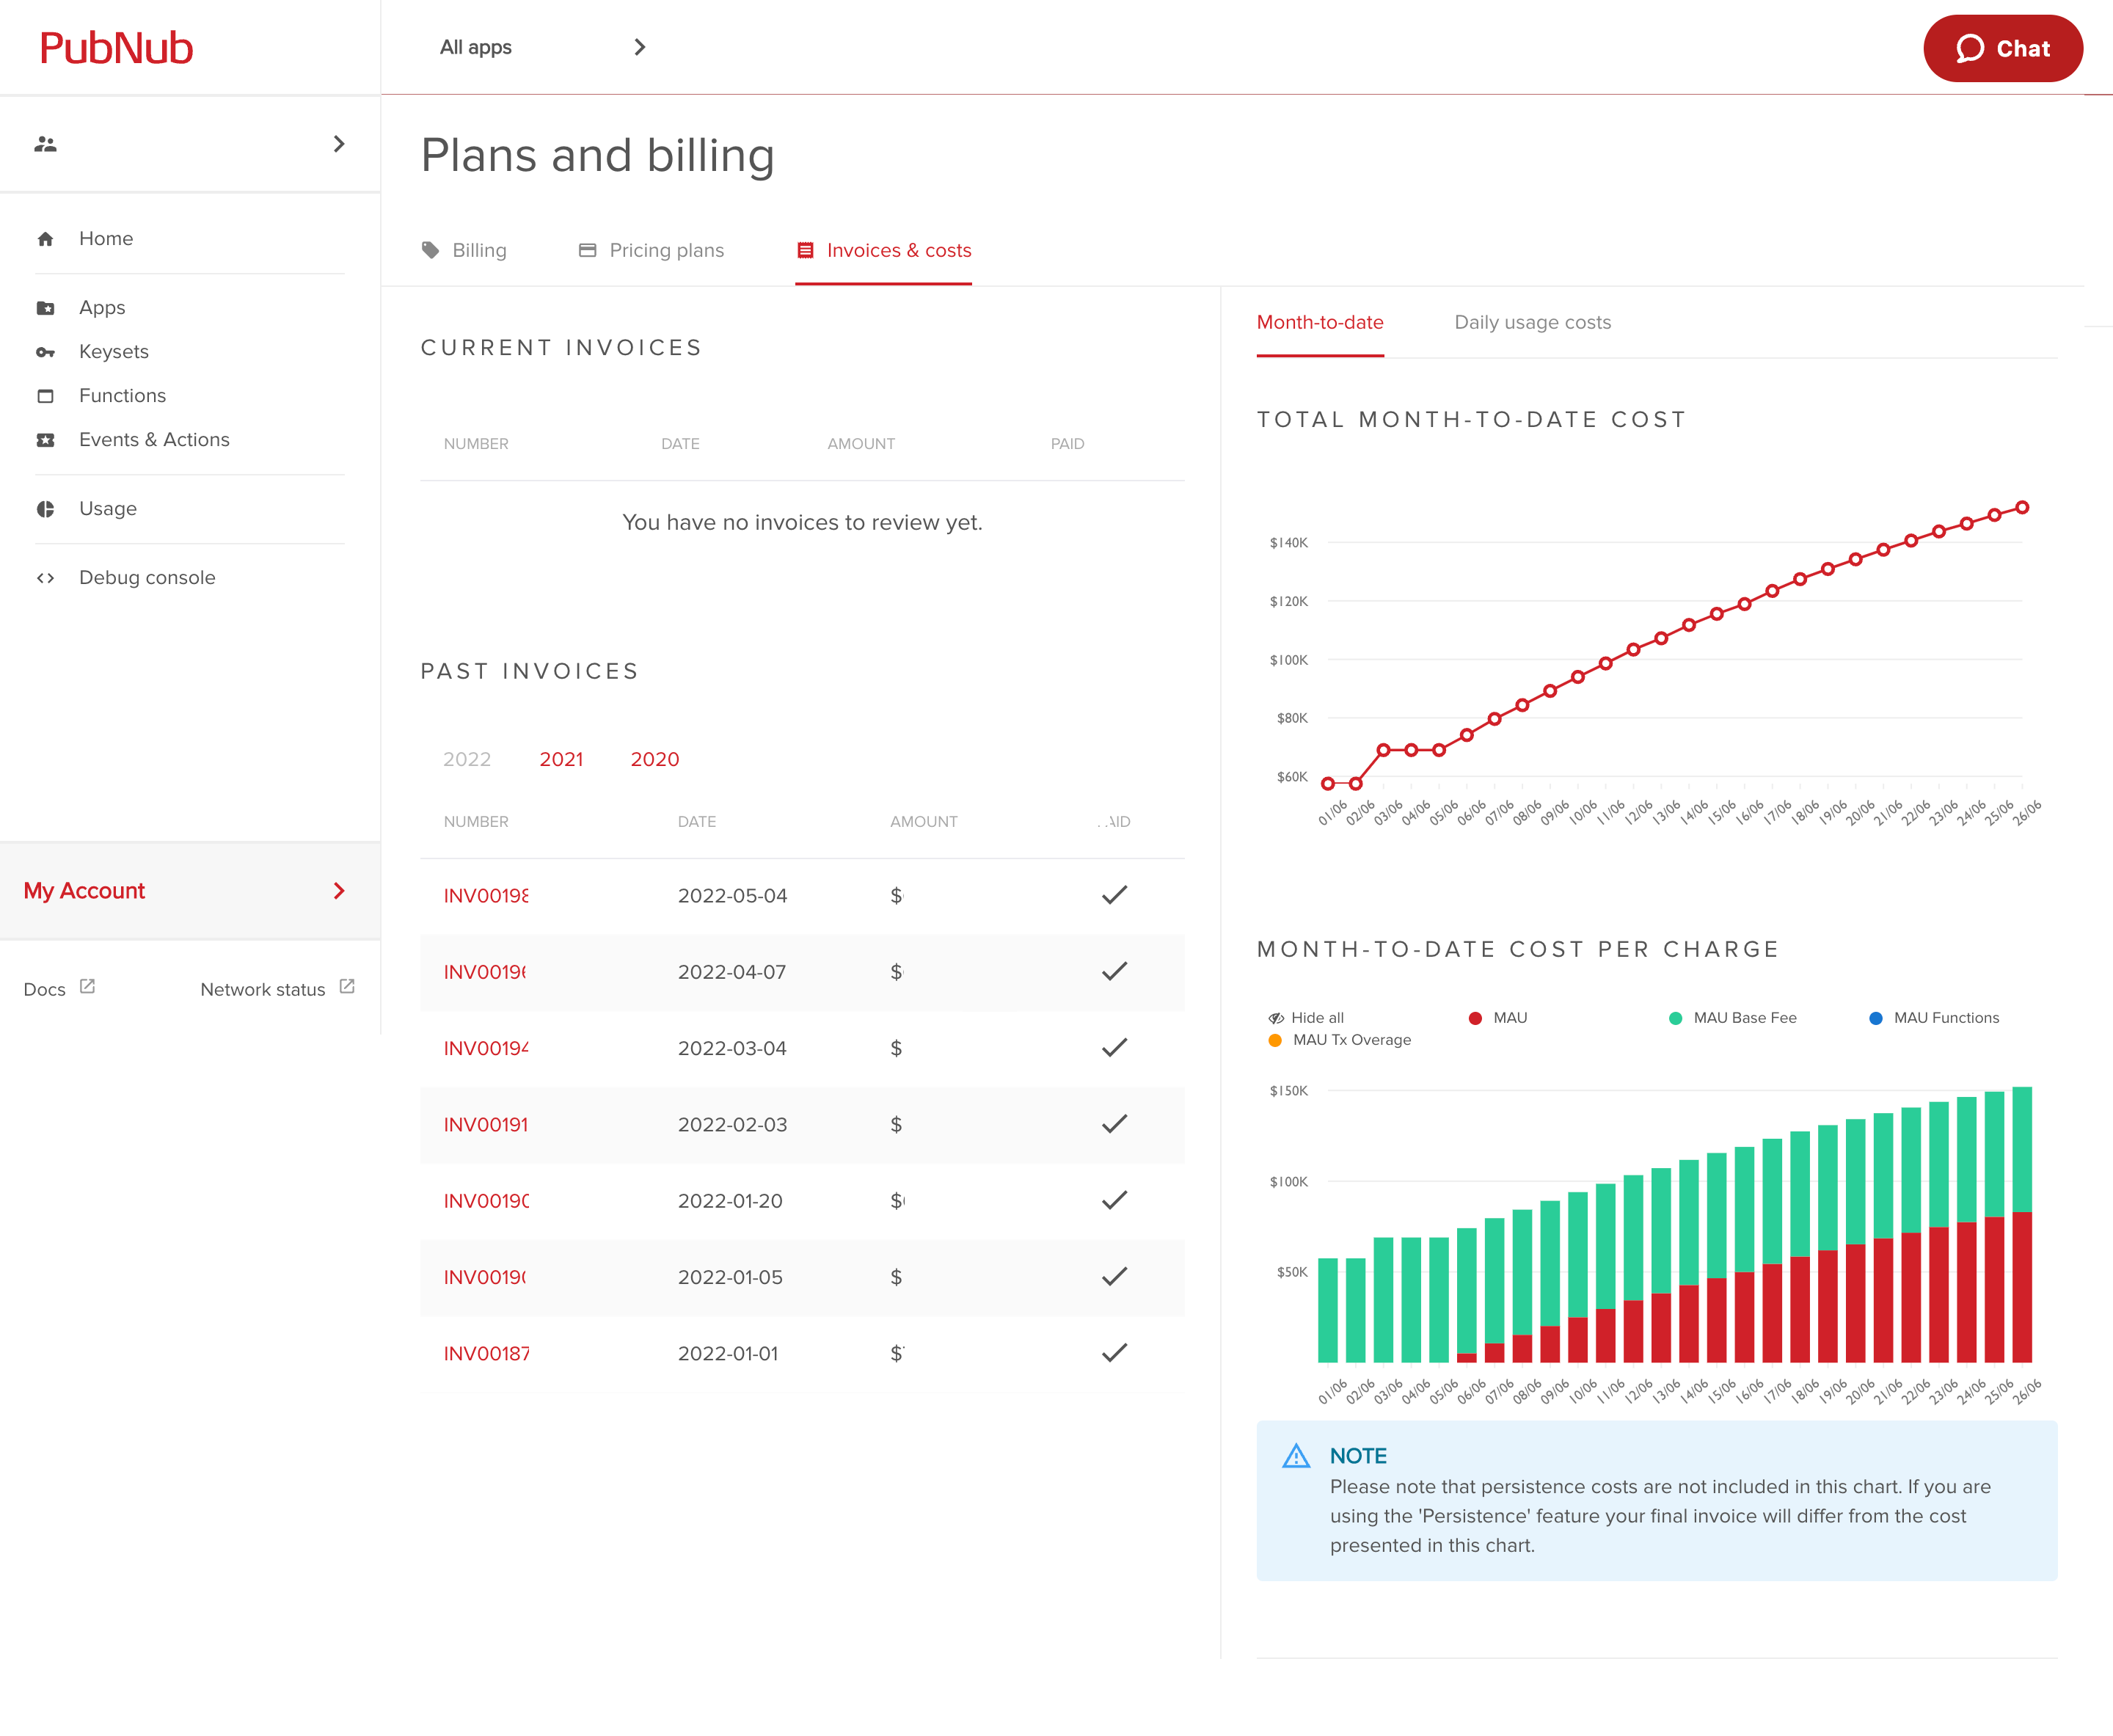 User interface of PubNub showing Plans and Billing page with past invoices list and graphs for total month-to-date cost and month-to-date cost per charge.